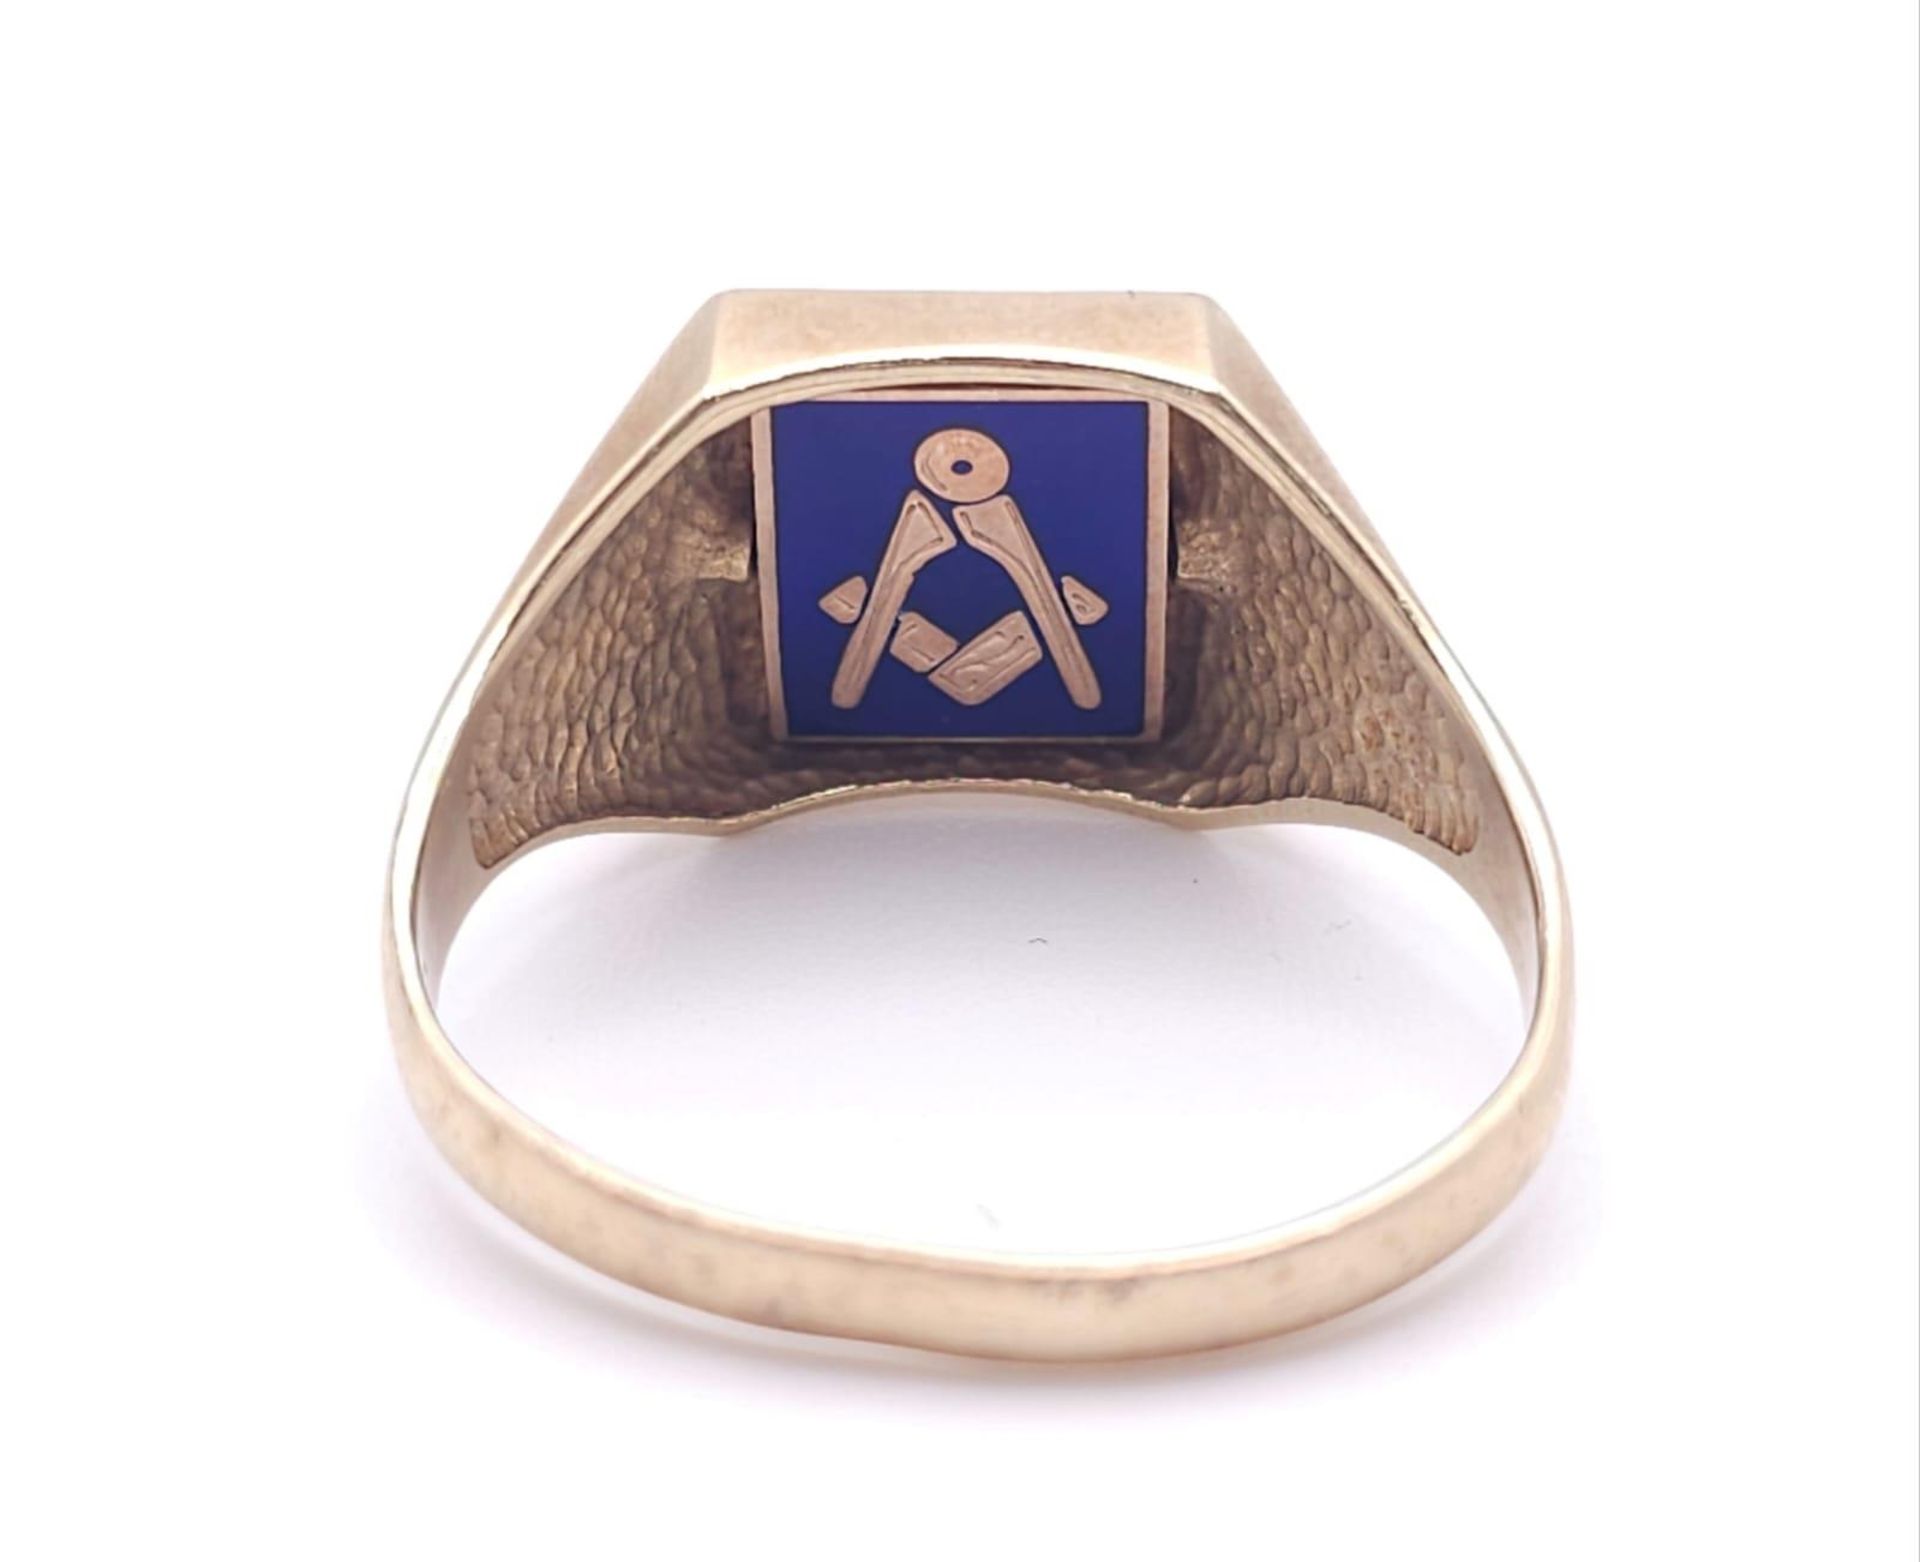 A GENTS 9K GOLD SIGNET RING WITH A HIDDEN MASONIC SYMBOL ON THE REVERSE, ENGRAVED PATTERN - Bild 3 aus 6